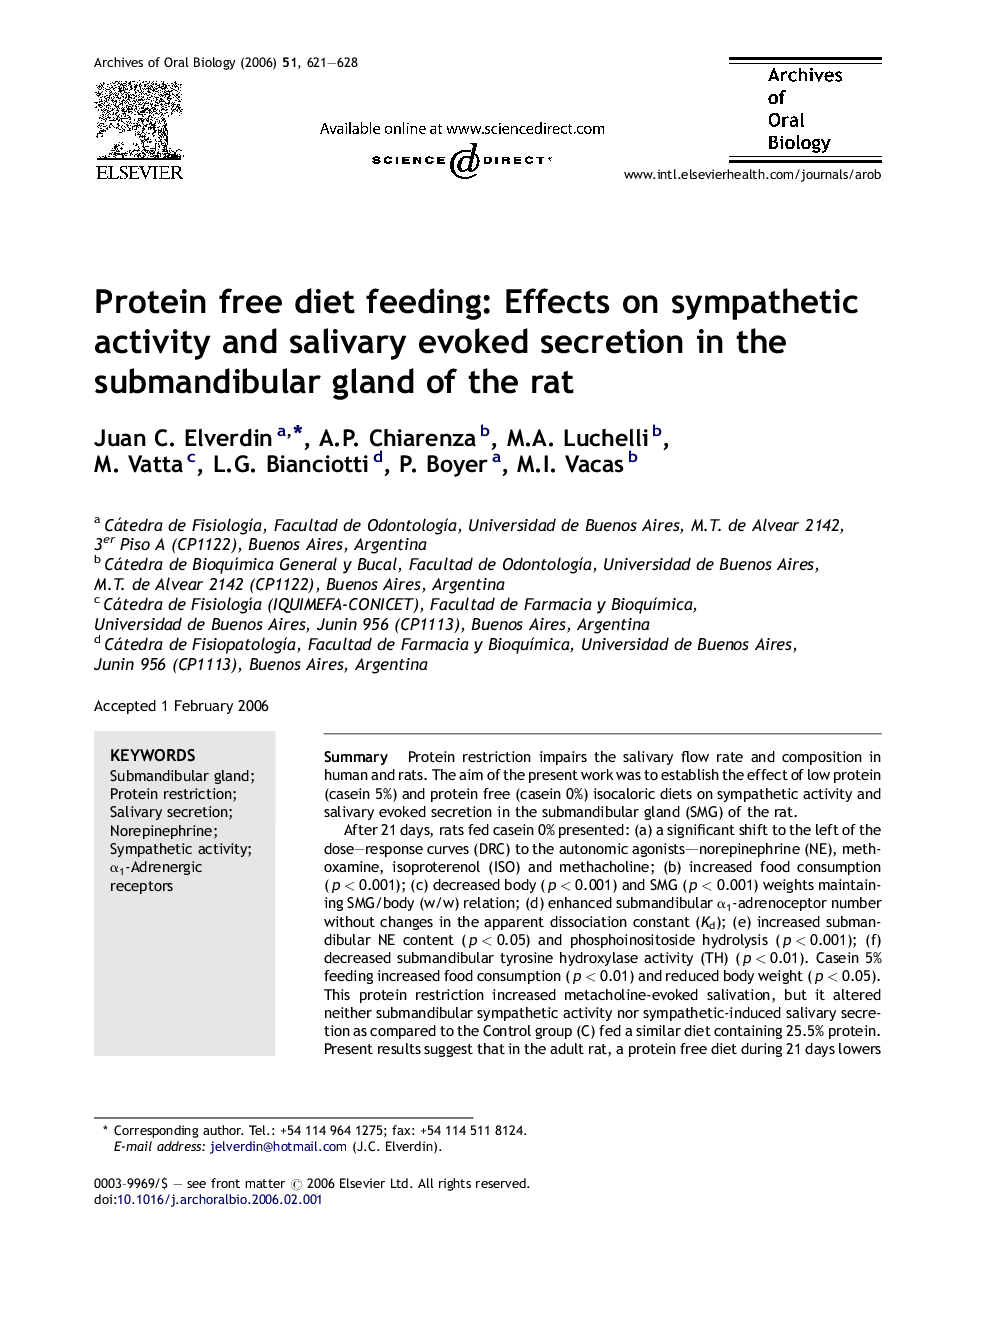 Protein free diet feeding: Effects on sympathetic activity and salivary evoked secretion in the submandibular gland of the rat